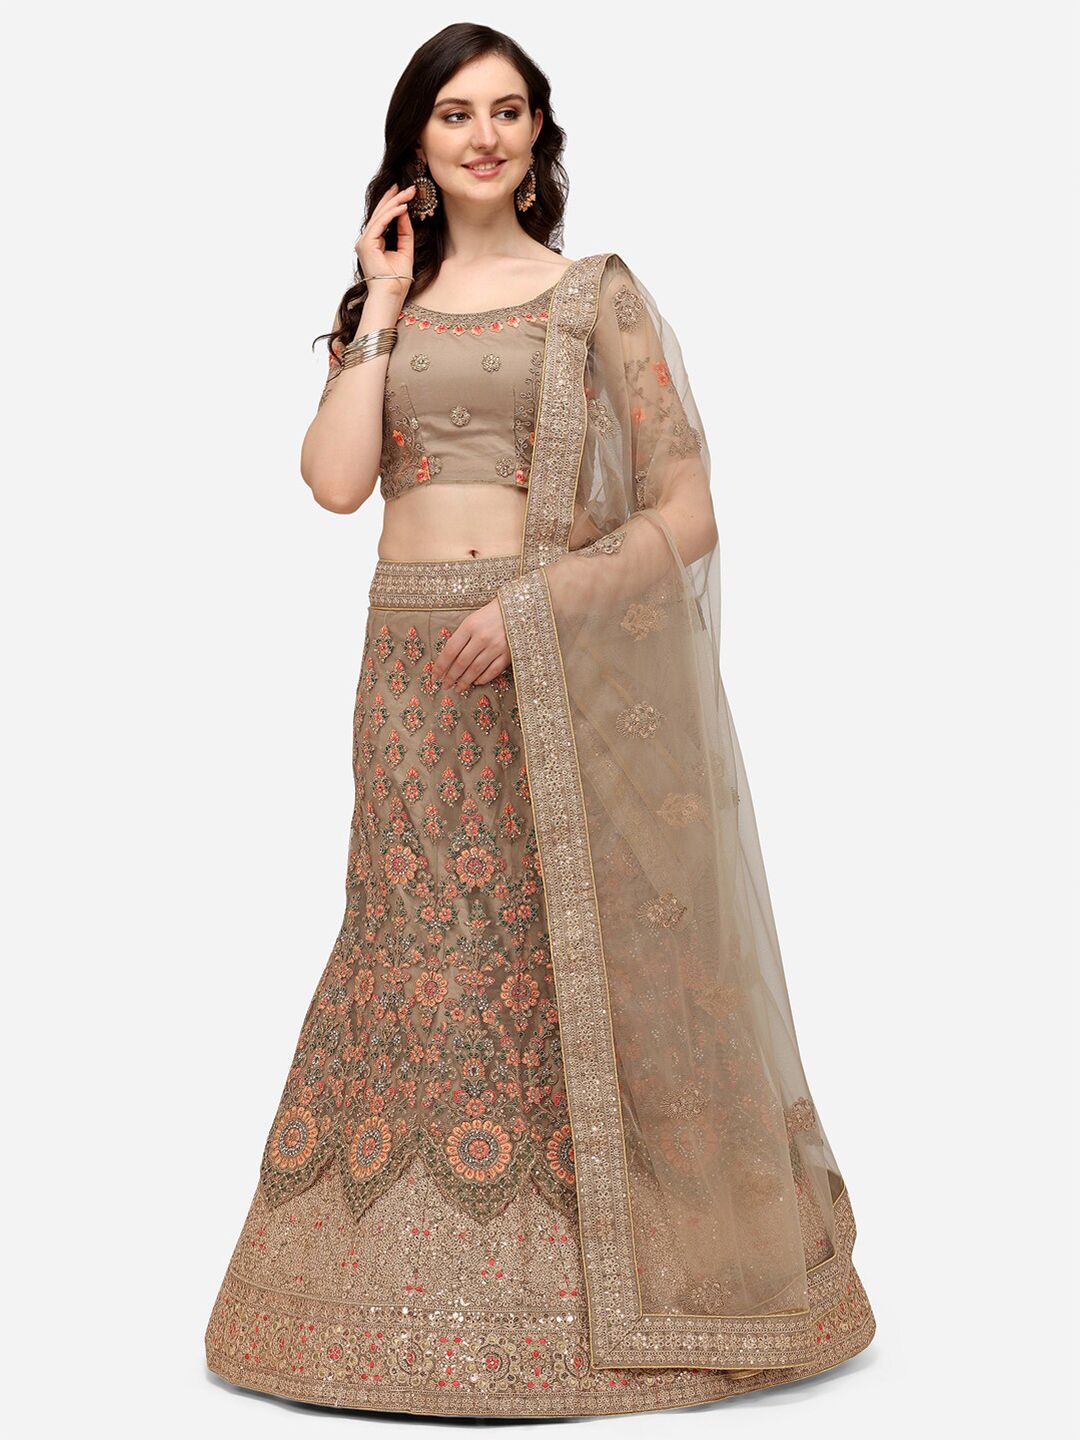 VRSALES Beige & Pink Embroidered Beads and Stones Semi-Stitched Lehenga & Unstitched Blouse With Dupatta Price in India